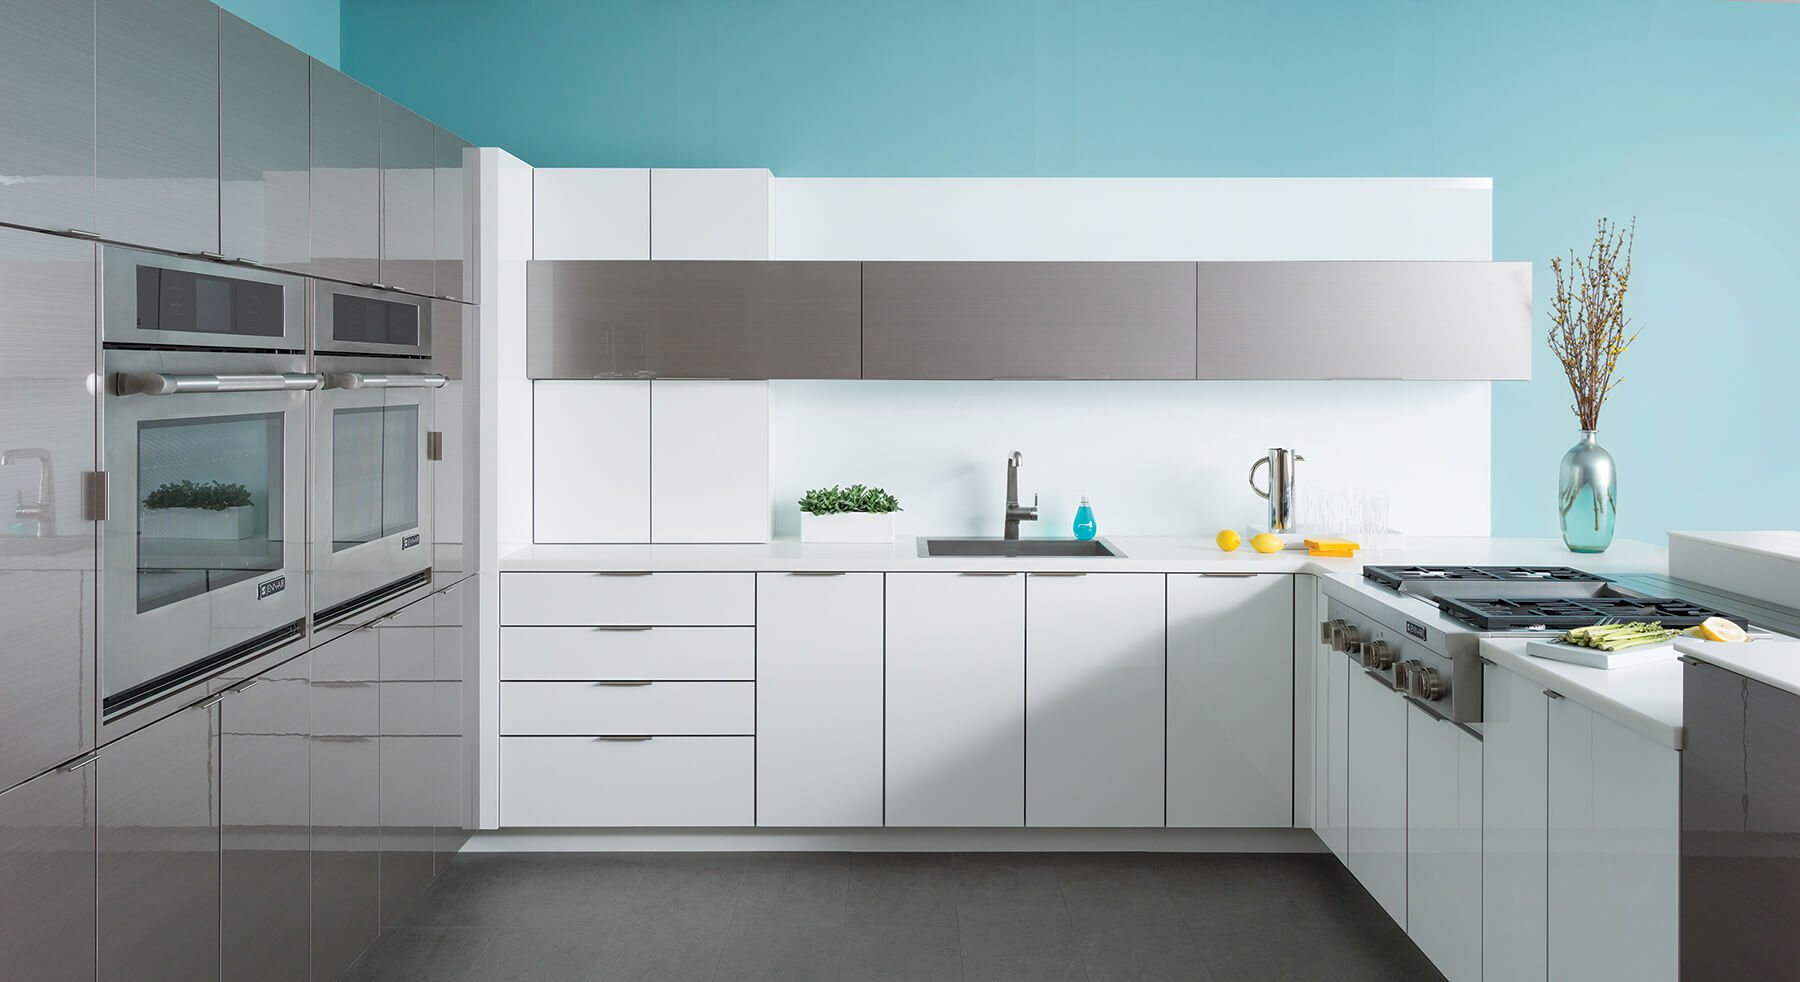 An ultra modern white and grey kitchen design with glossy contemporary cabinetry.